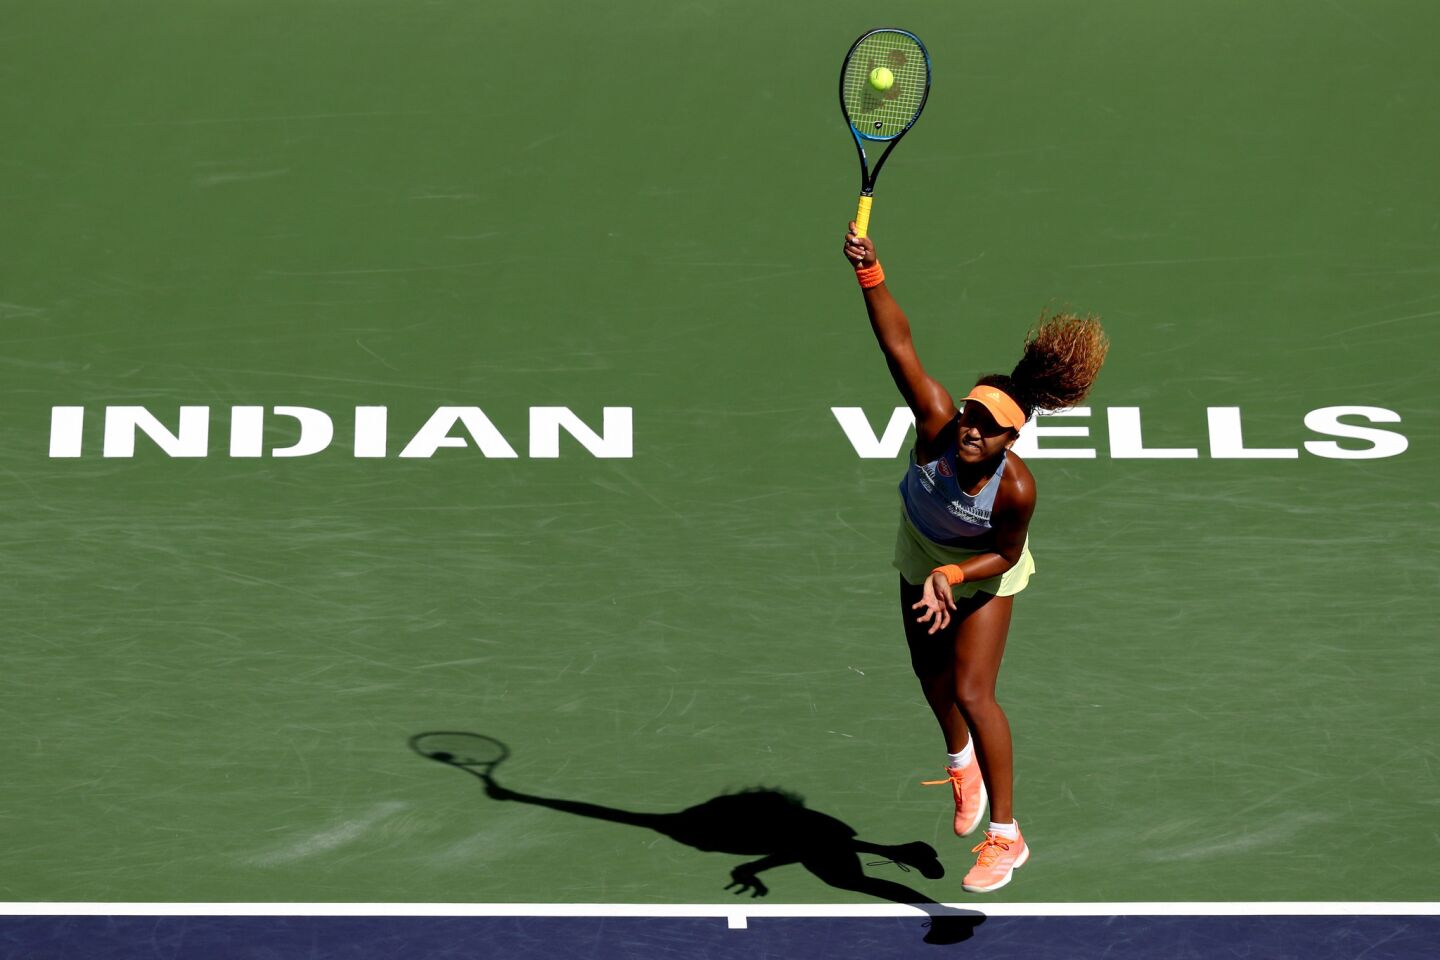 INDIAN WELLS, CA - MARCH 18: Naomi Osaka of Japan serves to Daria Kasatkina of Russia during the women's final on Day 14 of the BNP Paribas Open at the Indian Wells Tennis Garden on March 18, 2018 in Indian Wells, California. (Photo by Matthew Stockman/Getty Images) ** OUTS - ELSENT, FPG, CM - OUTS * NM, PH, VA if sourced by CT, LA or MoD **